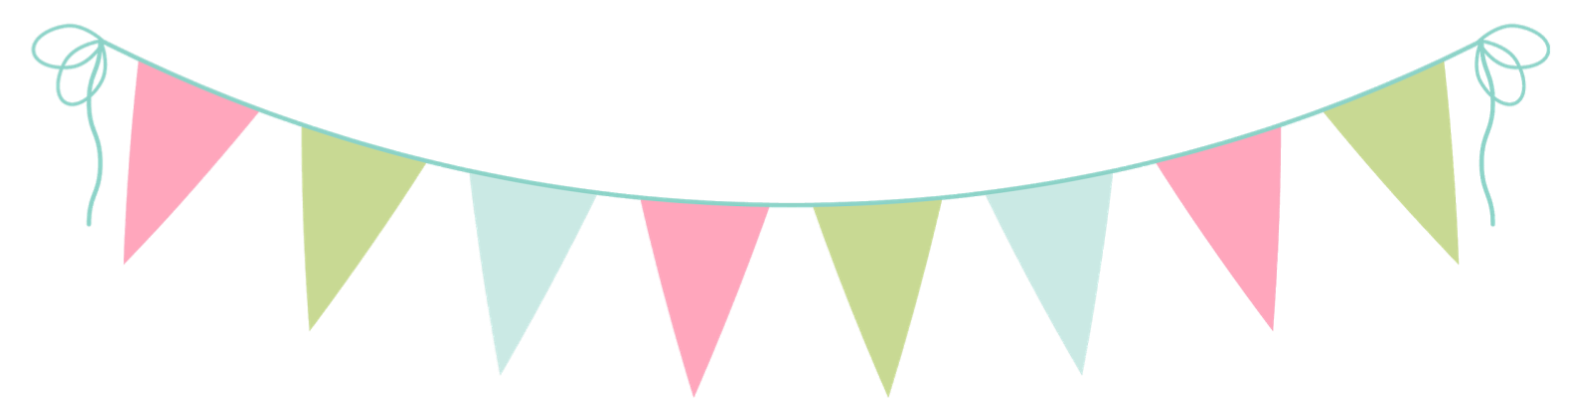 Party Flags PNG Clipart Background